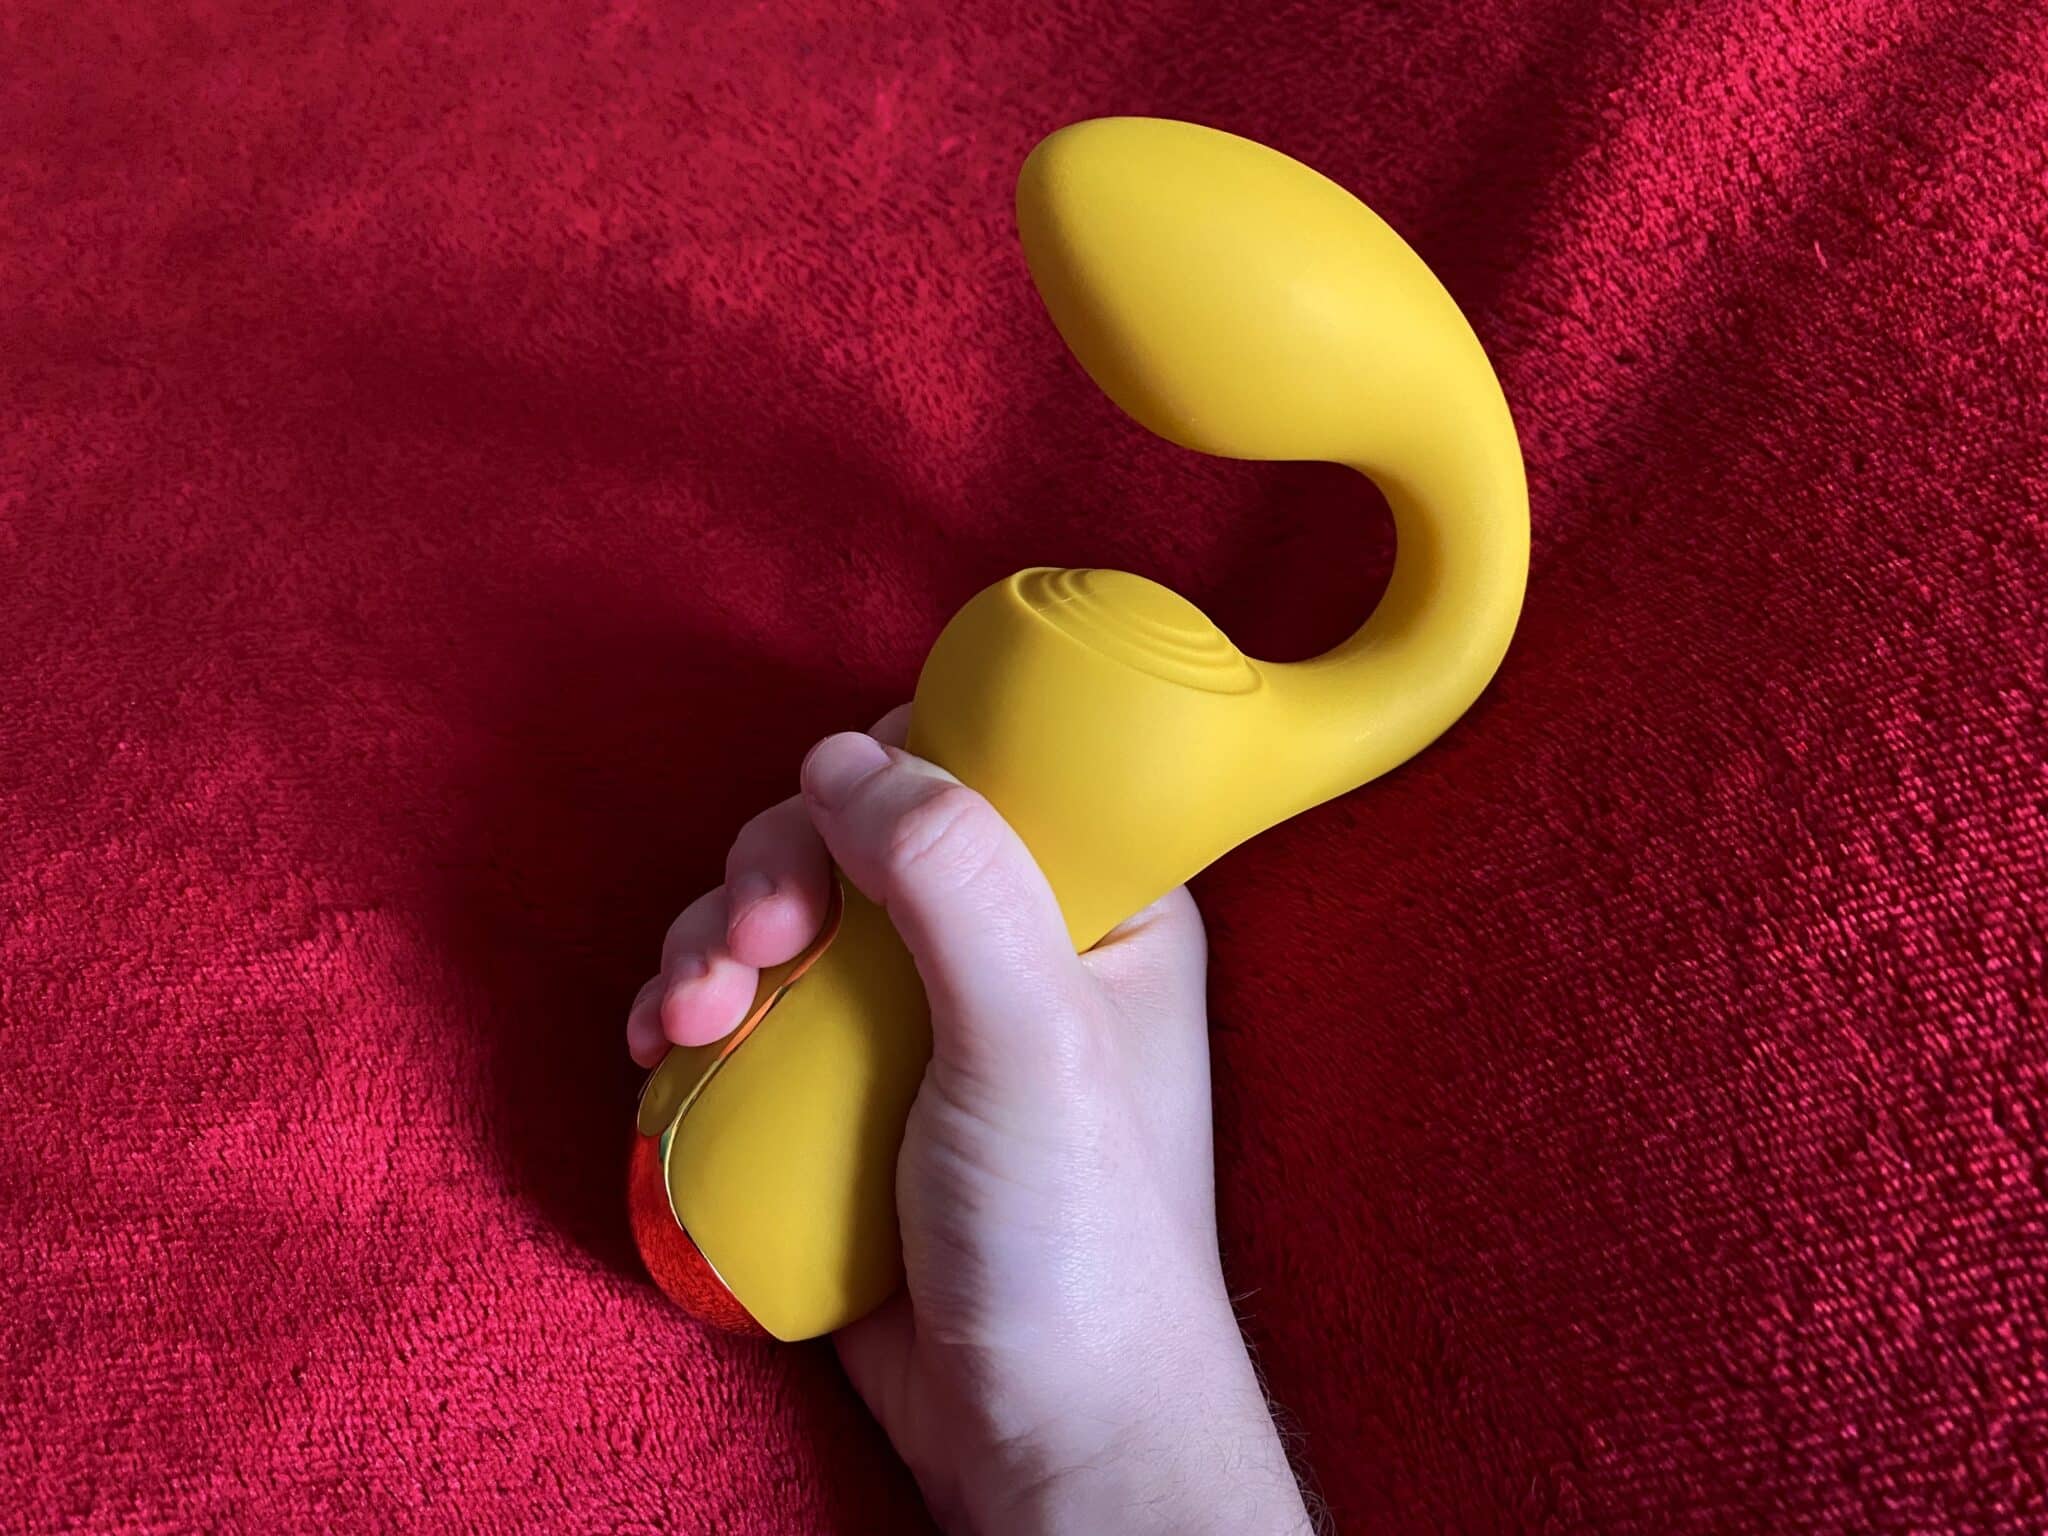 My Personal Experiences with Your New Favorite Double Vibrator